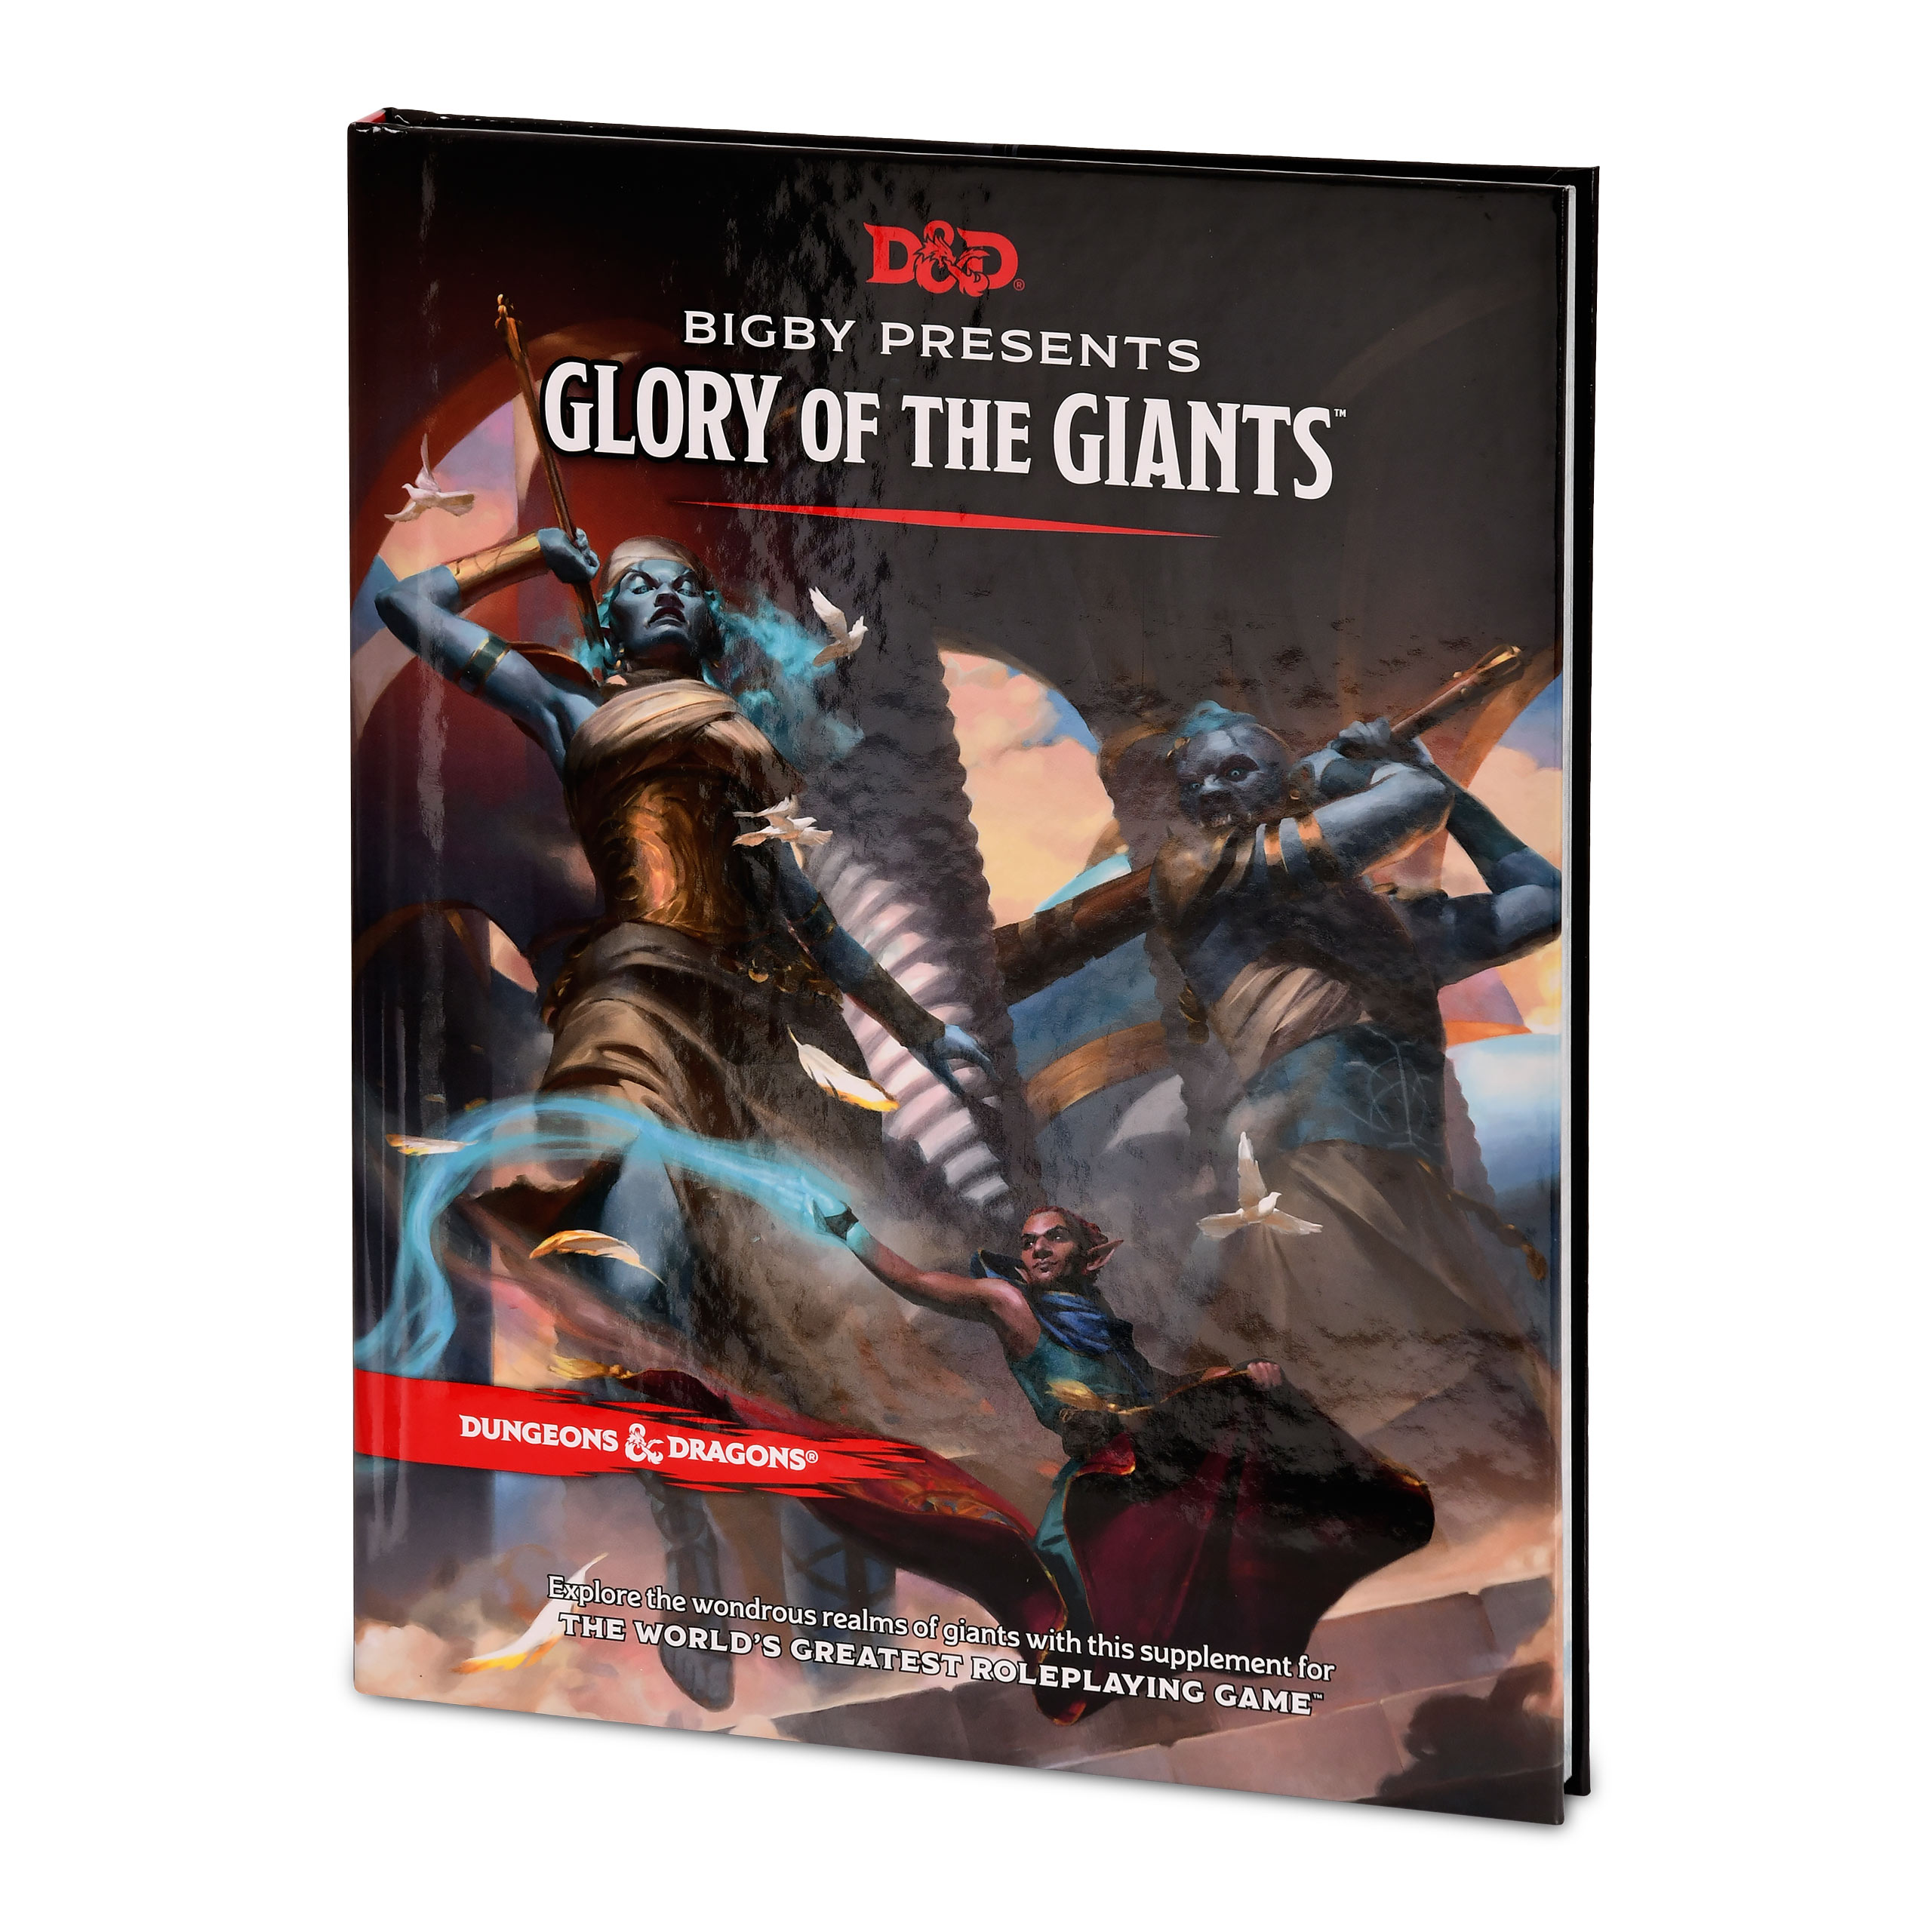 Dungeons & Dragons: Bigby presents: Glory of the Giants